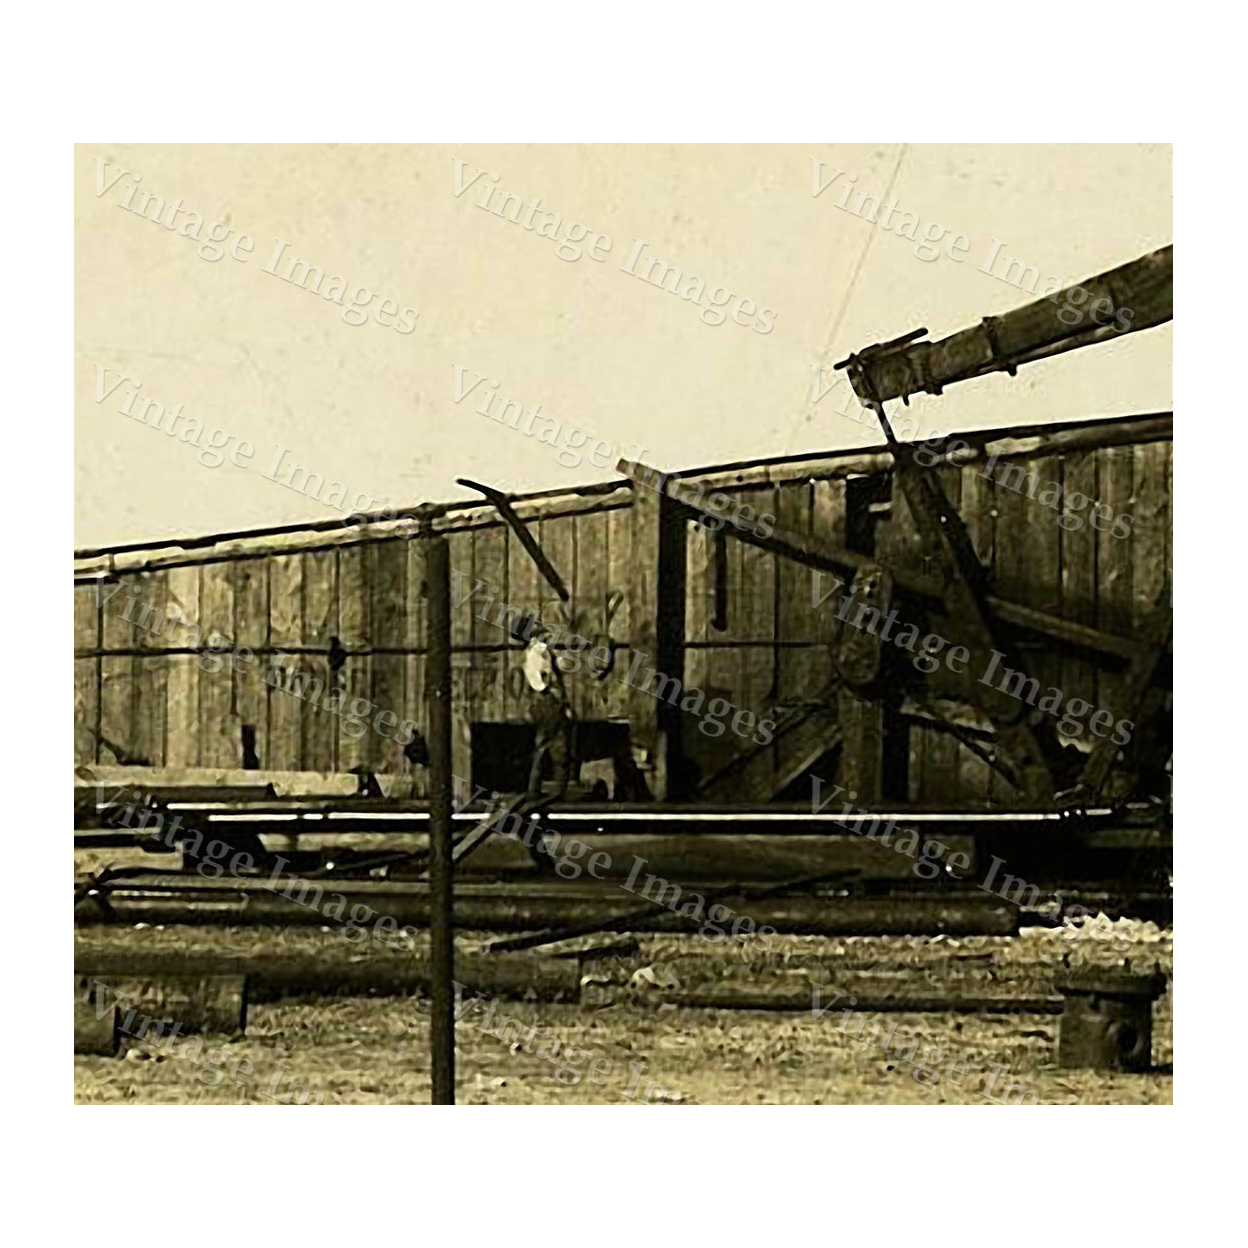 Vintage Imagery old oil well Photo drill drilling rig derrick gushing oil field sepia tone photo wall  Texas oil gusher Photo Vintage